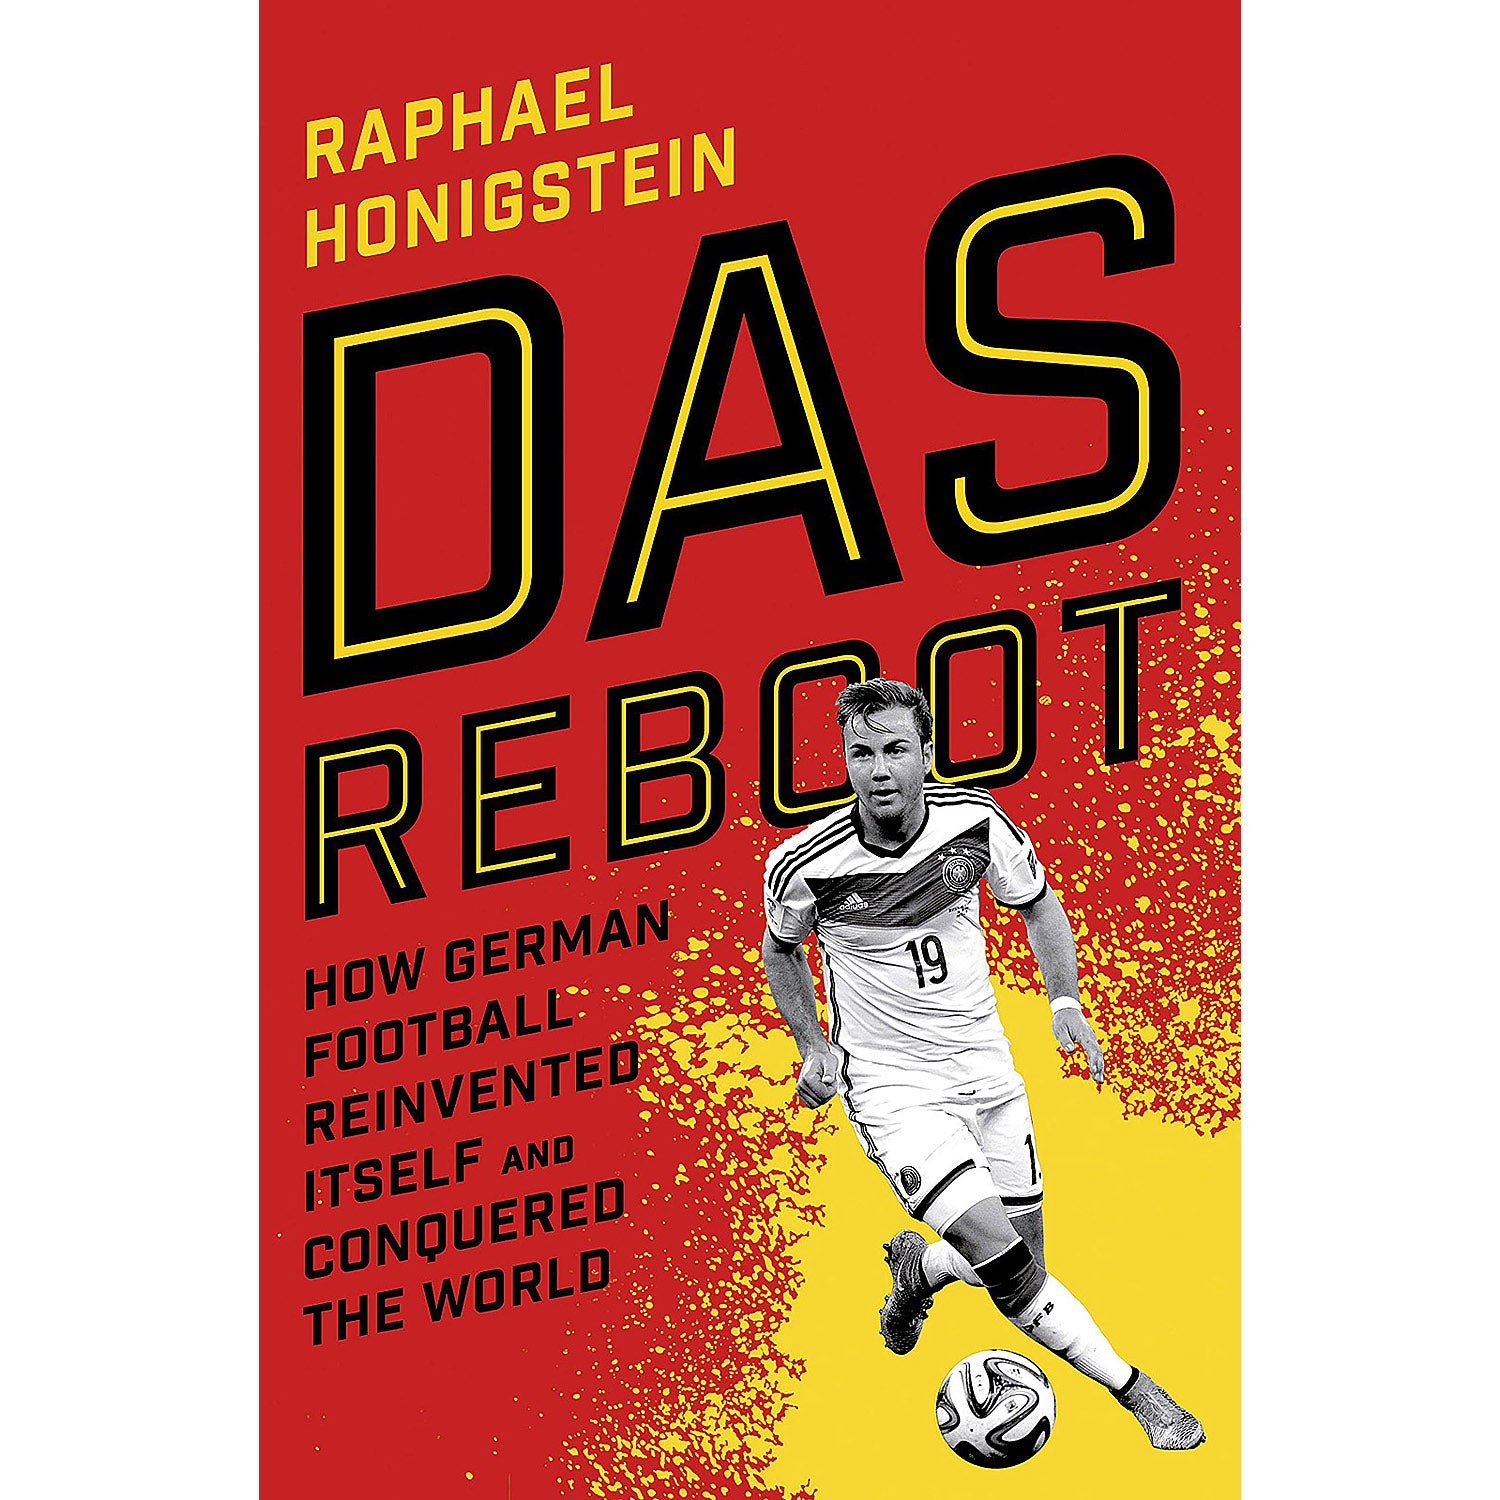 Das Reboot – How German Football Reinvented Itself and Conquered the World